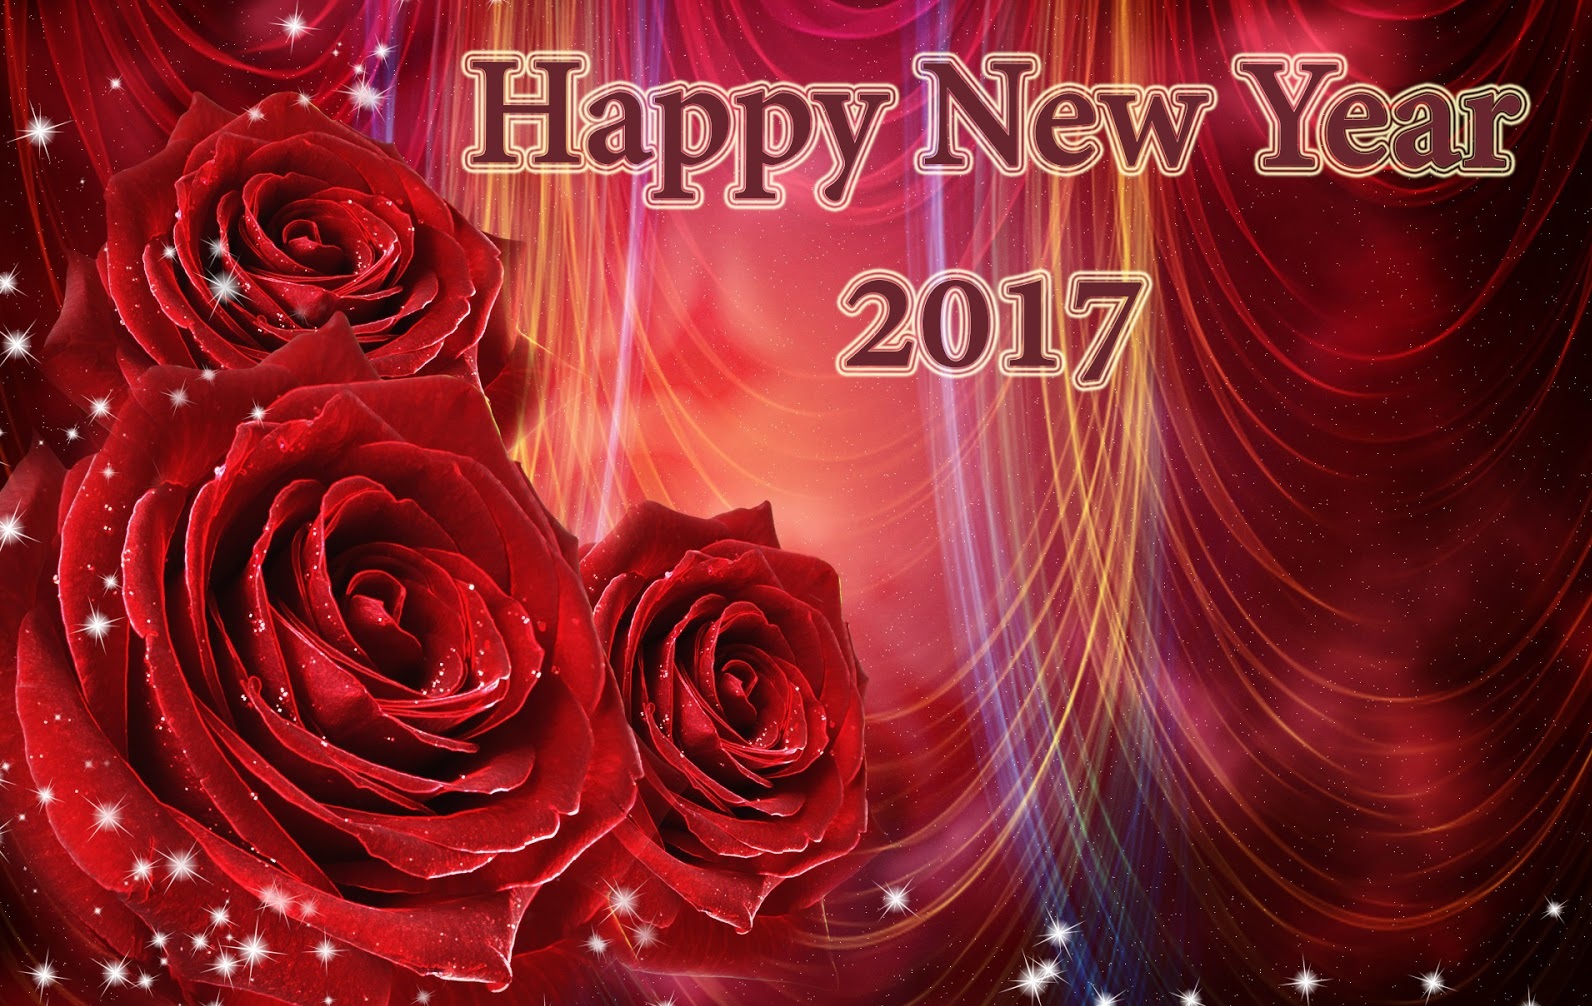 Background 2017 Happy New Year PNG Transparent Background, Free Download  #28821 - FreeIconsPNG